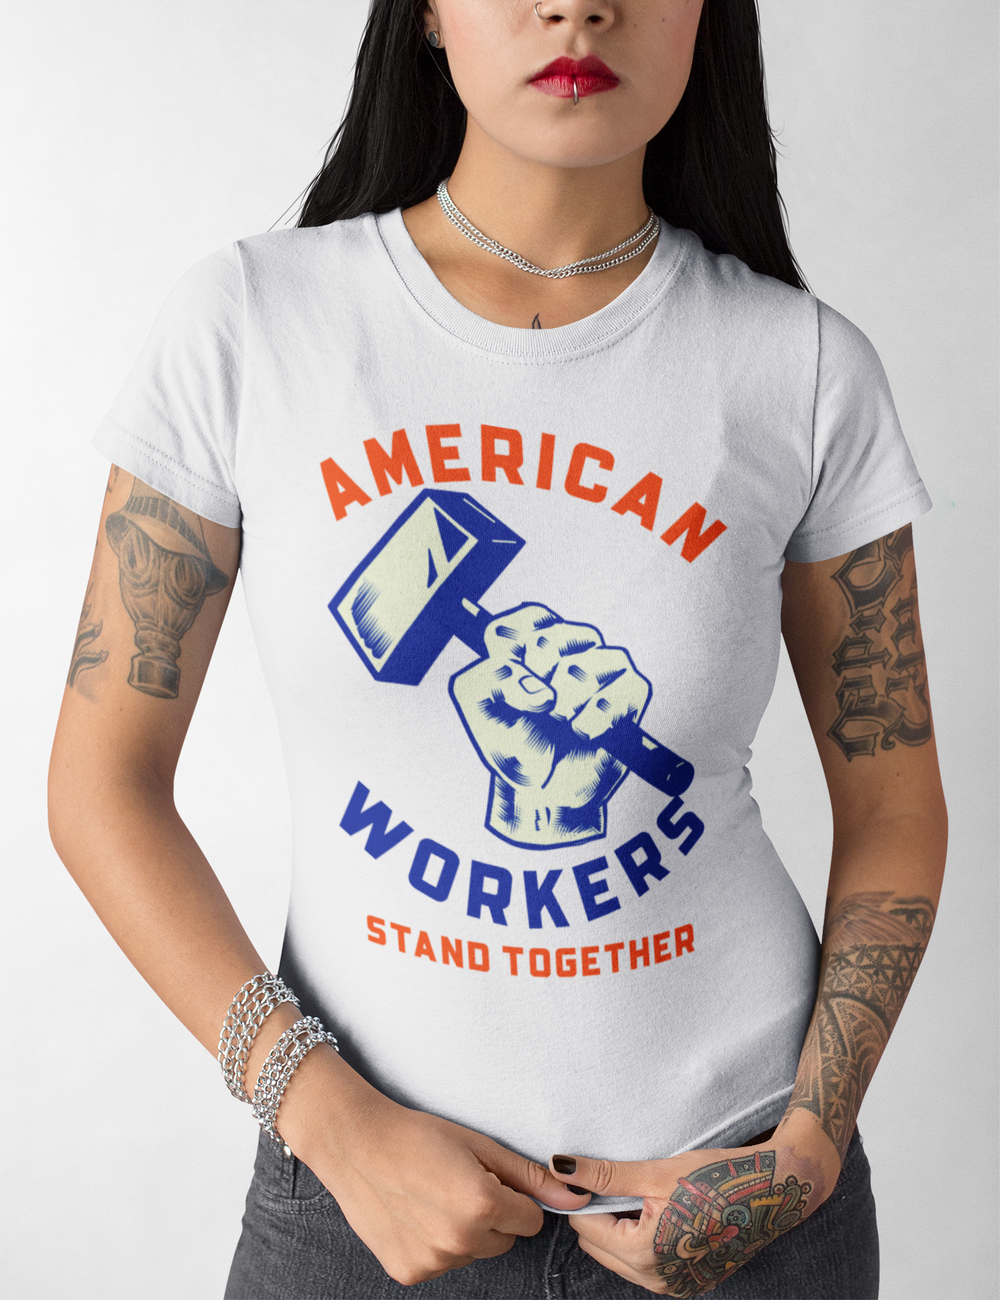 American Workers Stand Together | Women's Style T-Shirt OniTakai